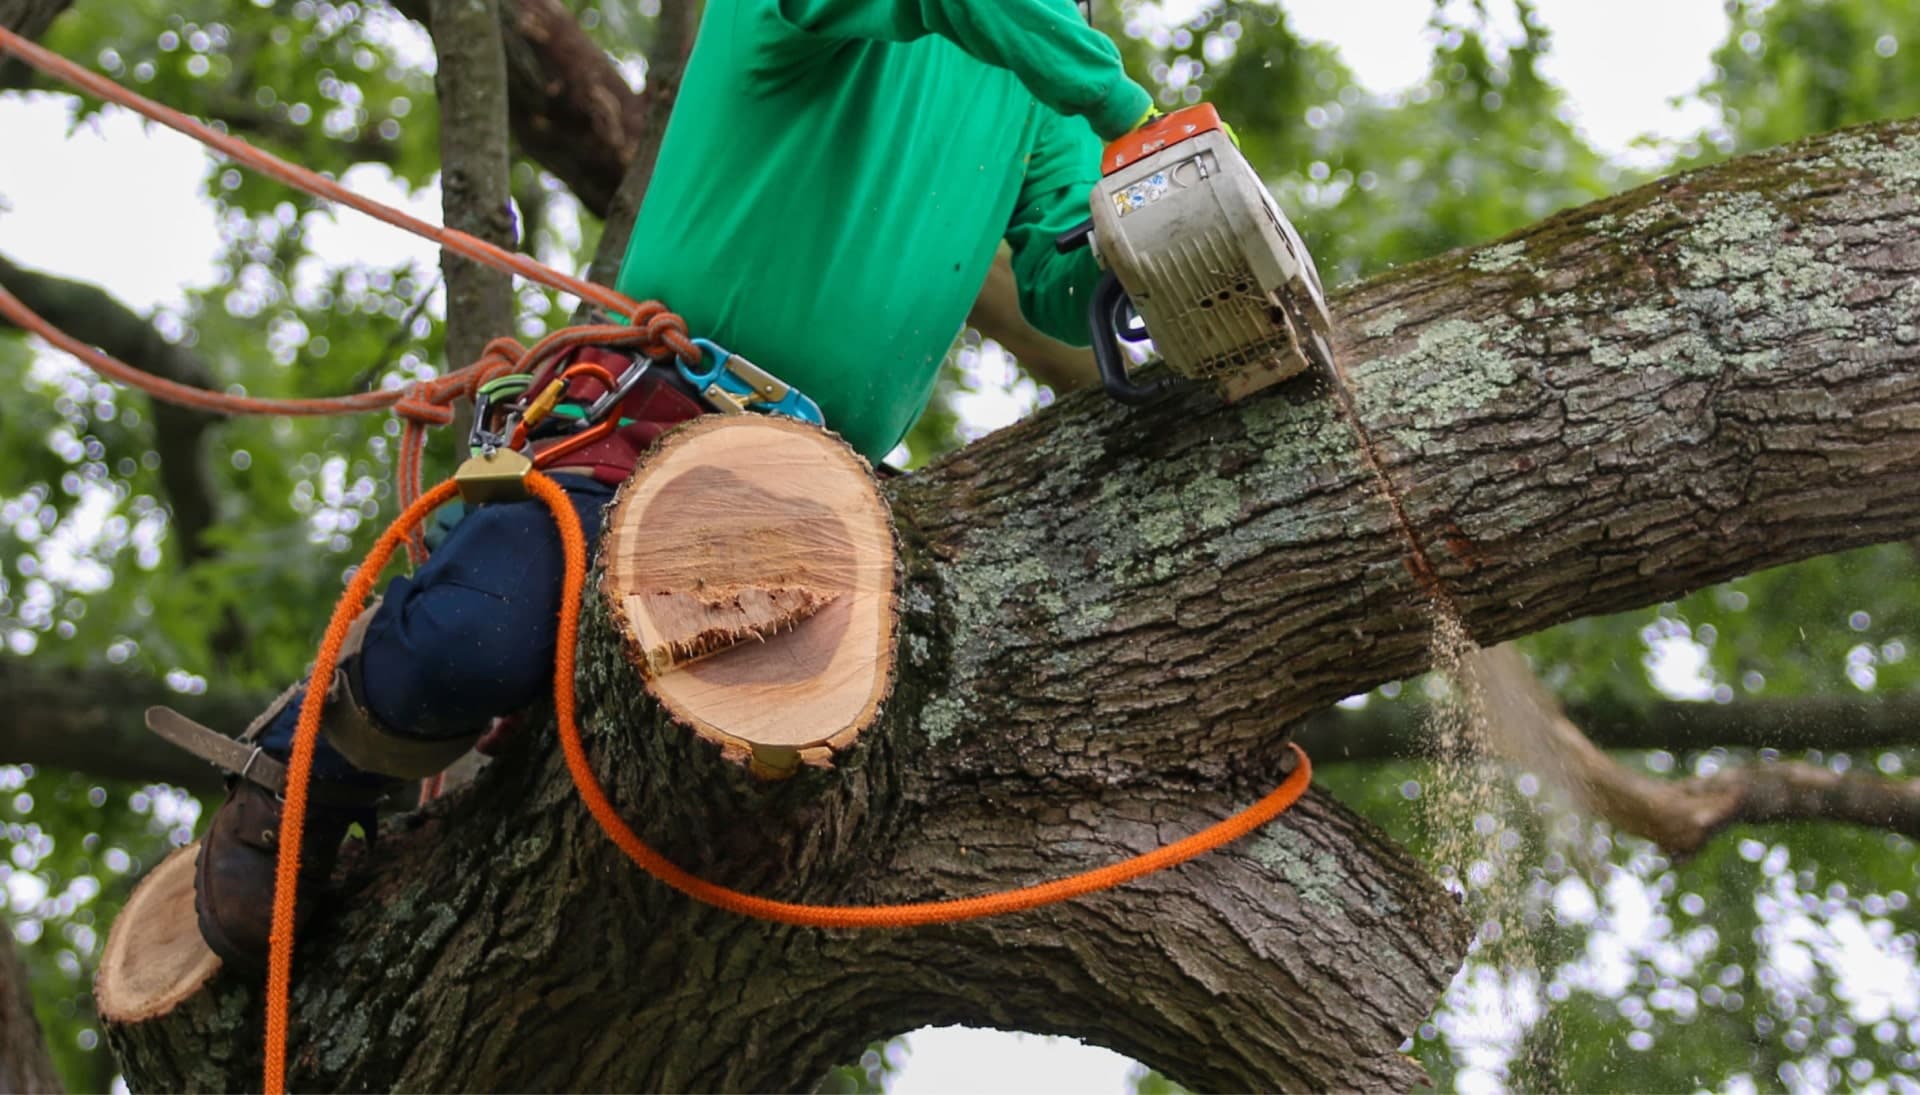 Shed your worries away with best tree removal in Oklahoma City